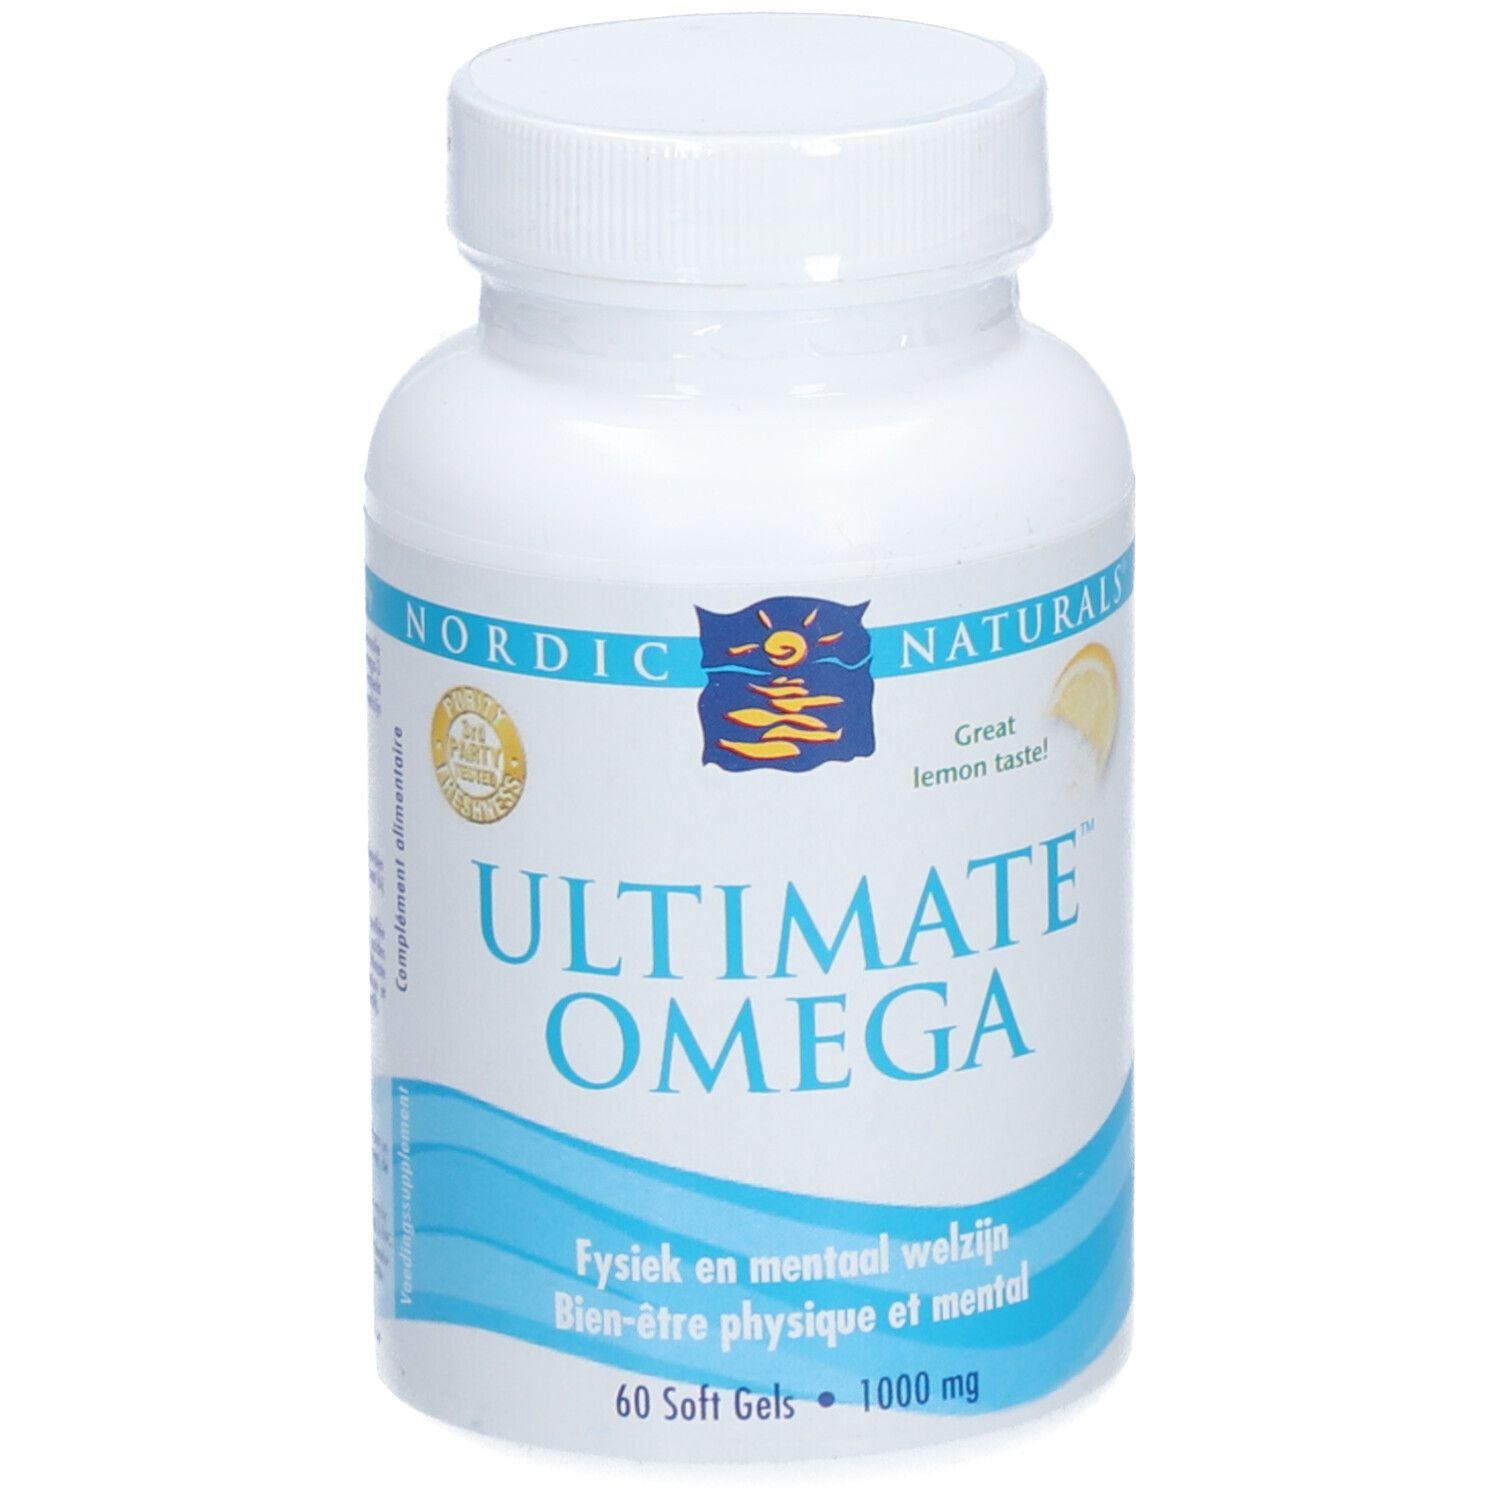 Image of NORDIC NATURALS ULTIMATE OMEGA